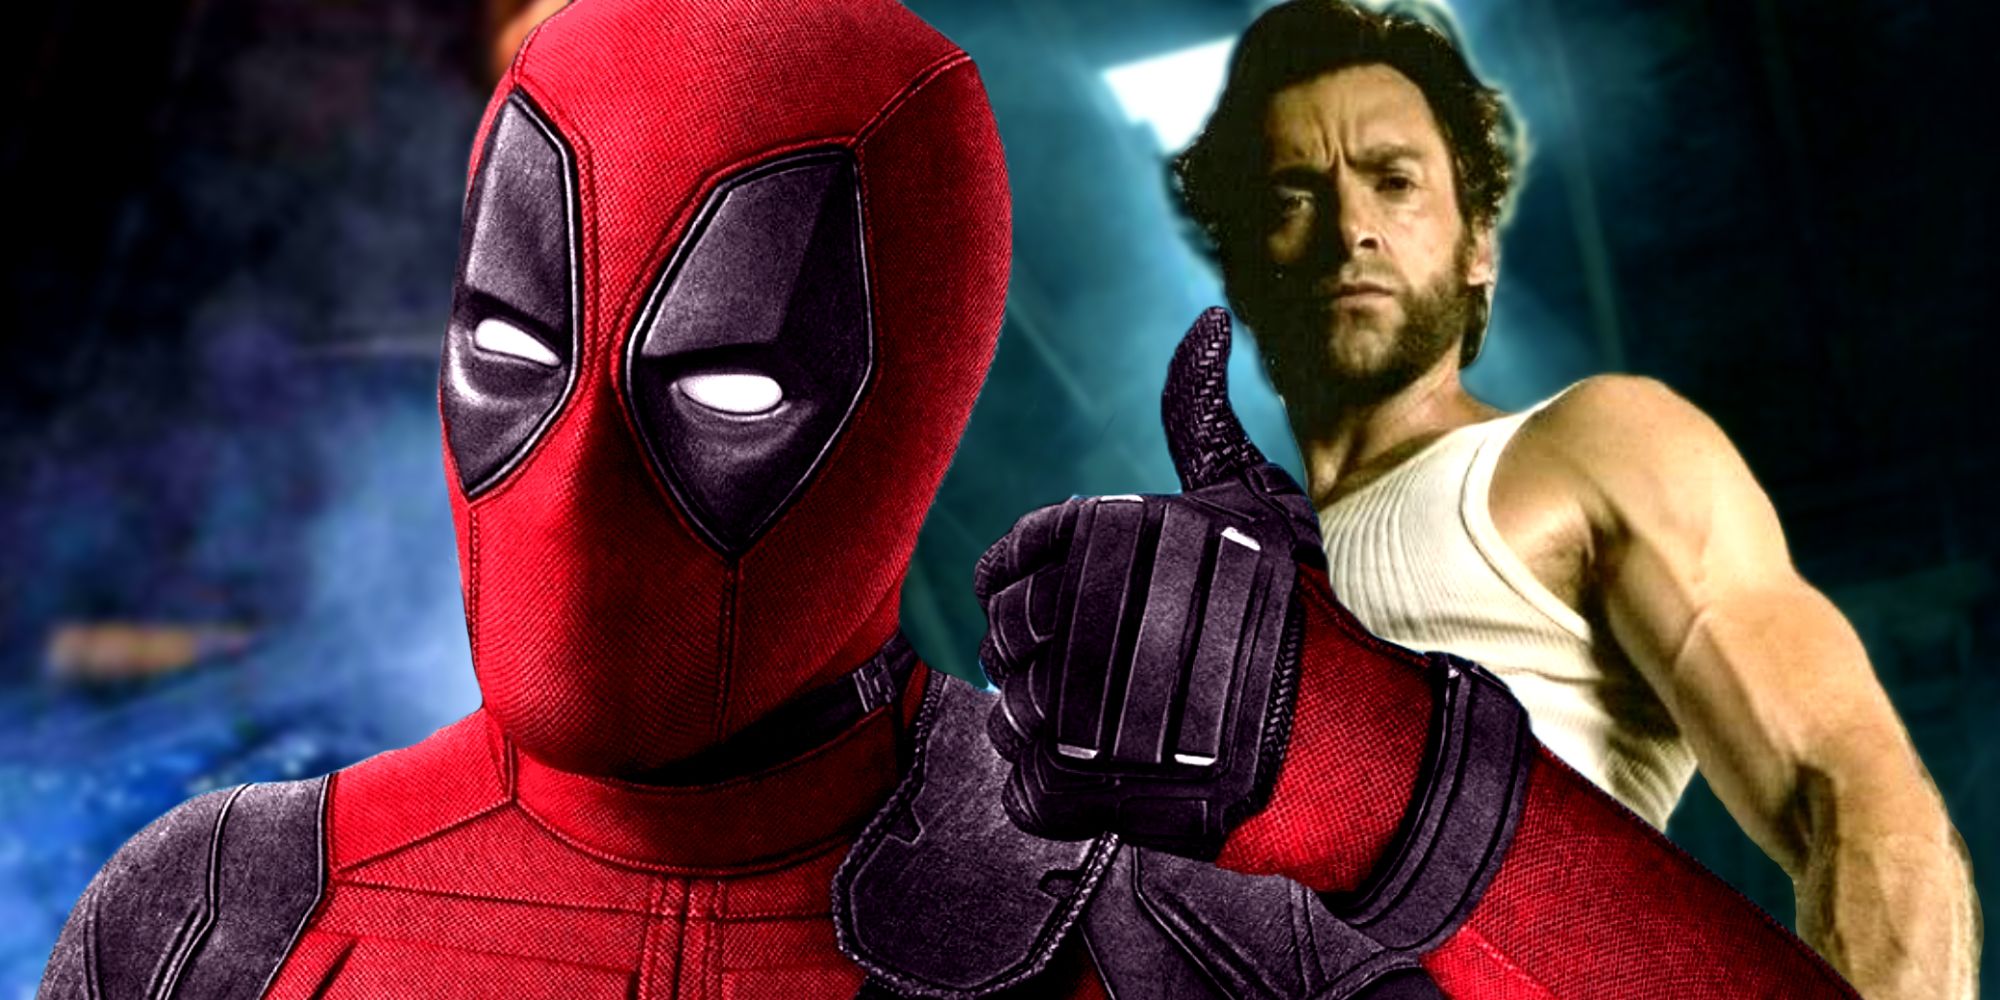 Deadpool Doing Thumbs Up Sign and Wolverine Standing Behind